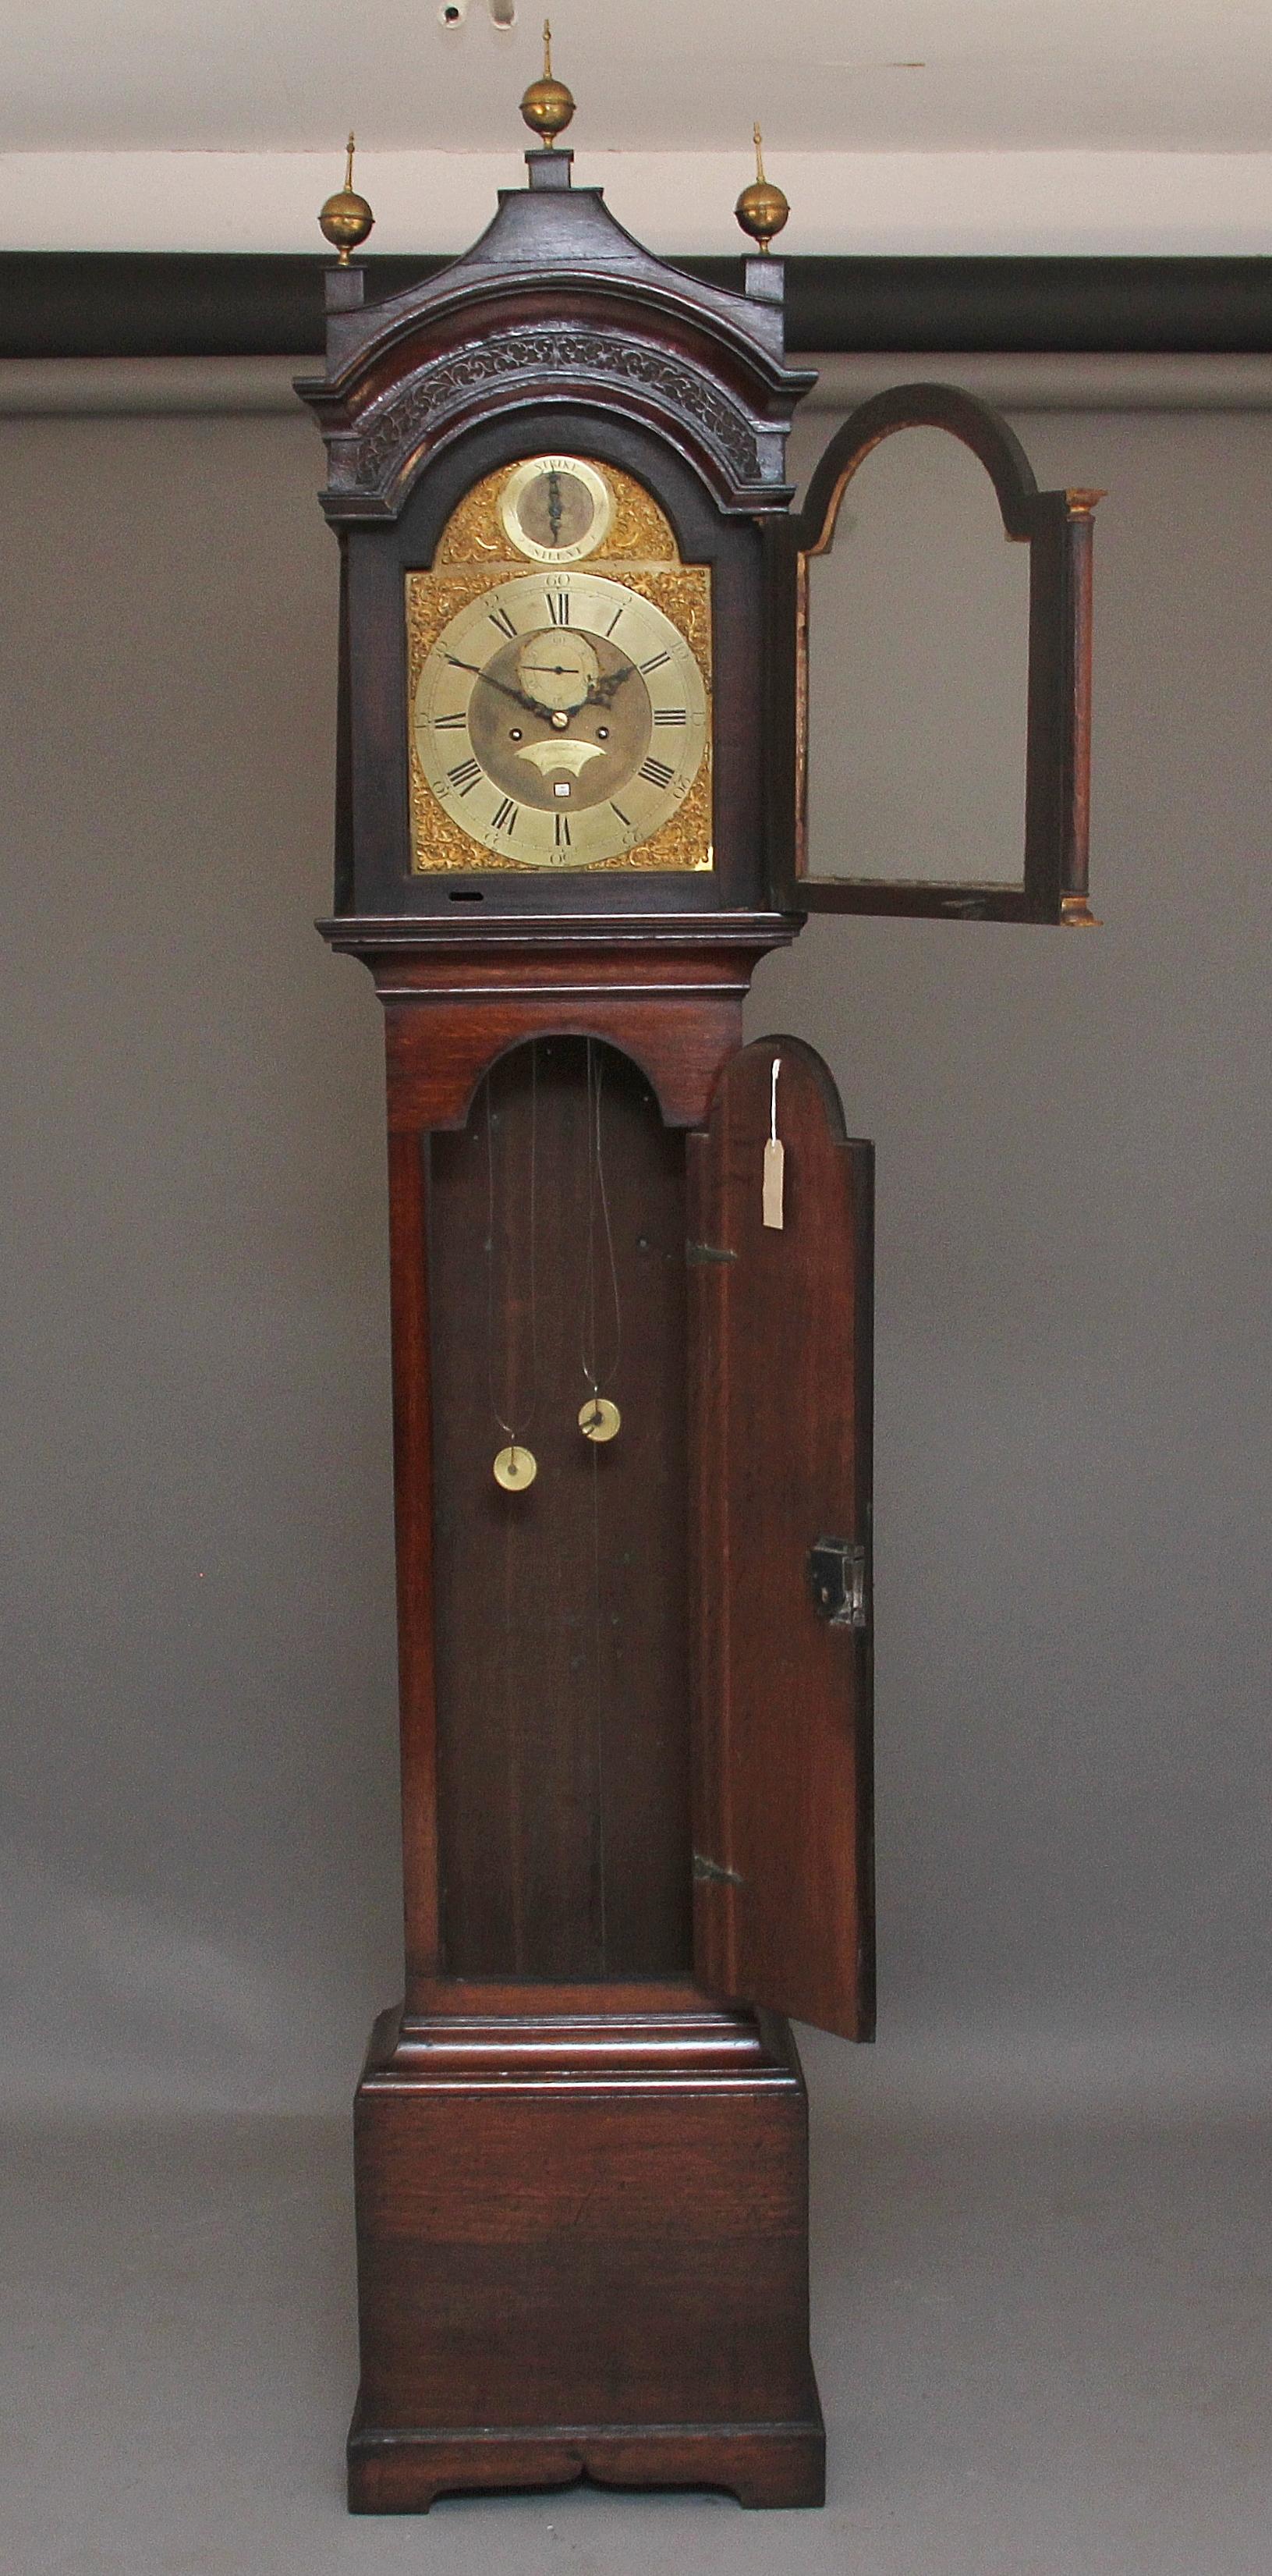 A fabulous quality 18th century oak long case clock by J Spendlove of Cambridge, having a eight day arched brass dial with a strike or silent and seconds dial, there is blind fret on the hood and also three brass finials. A really lovely clock and